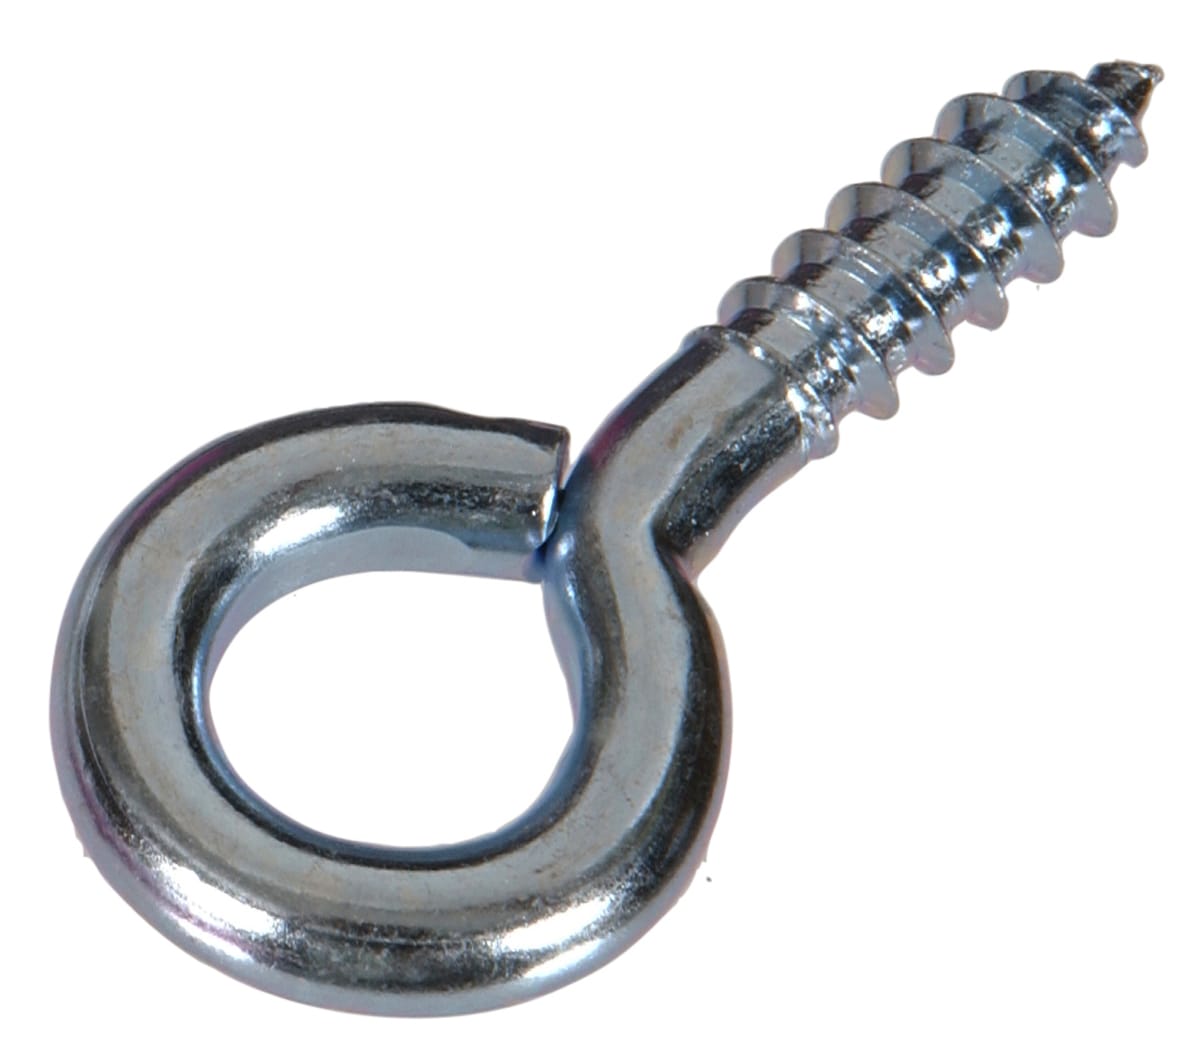 Stainless Steel Hooks at